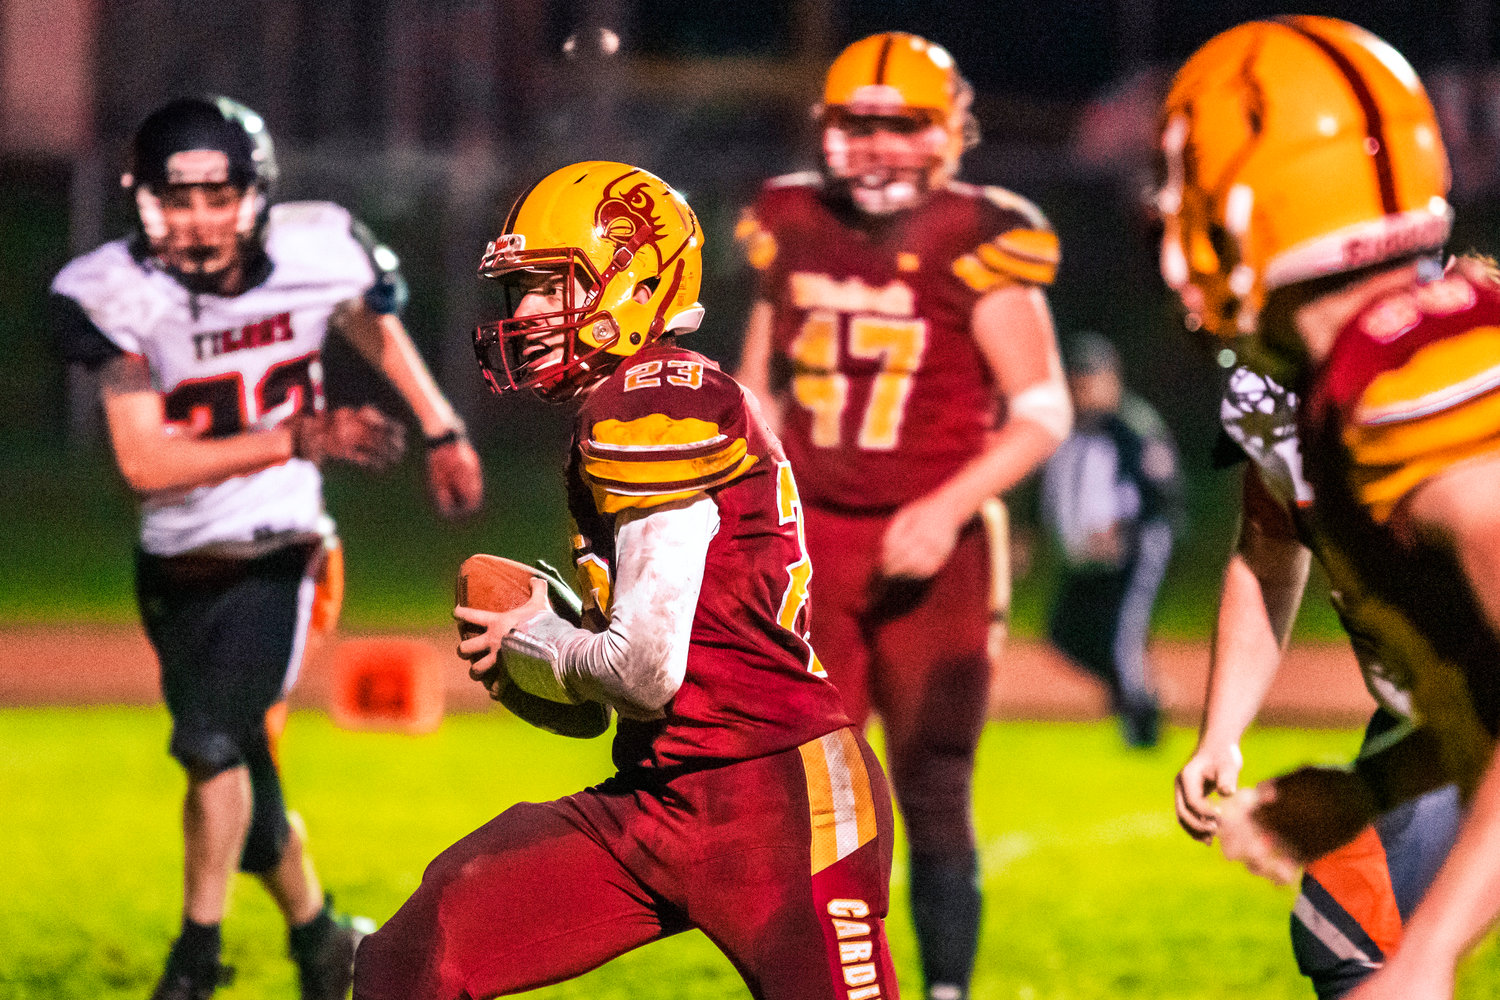 Winlock Senior Neal Patching (23) runs with the football for a touchdown Friday night on Homecoming.